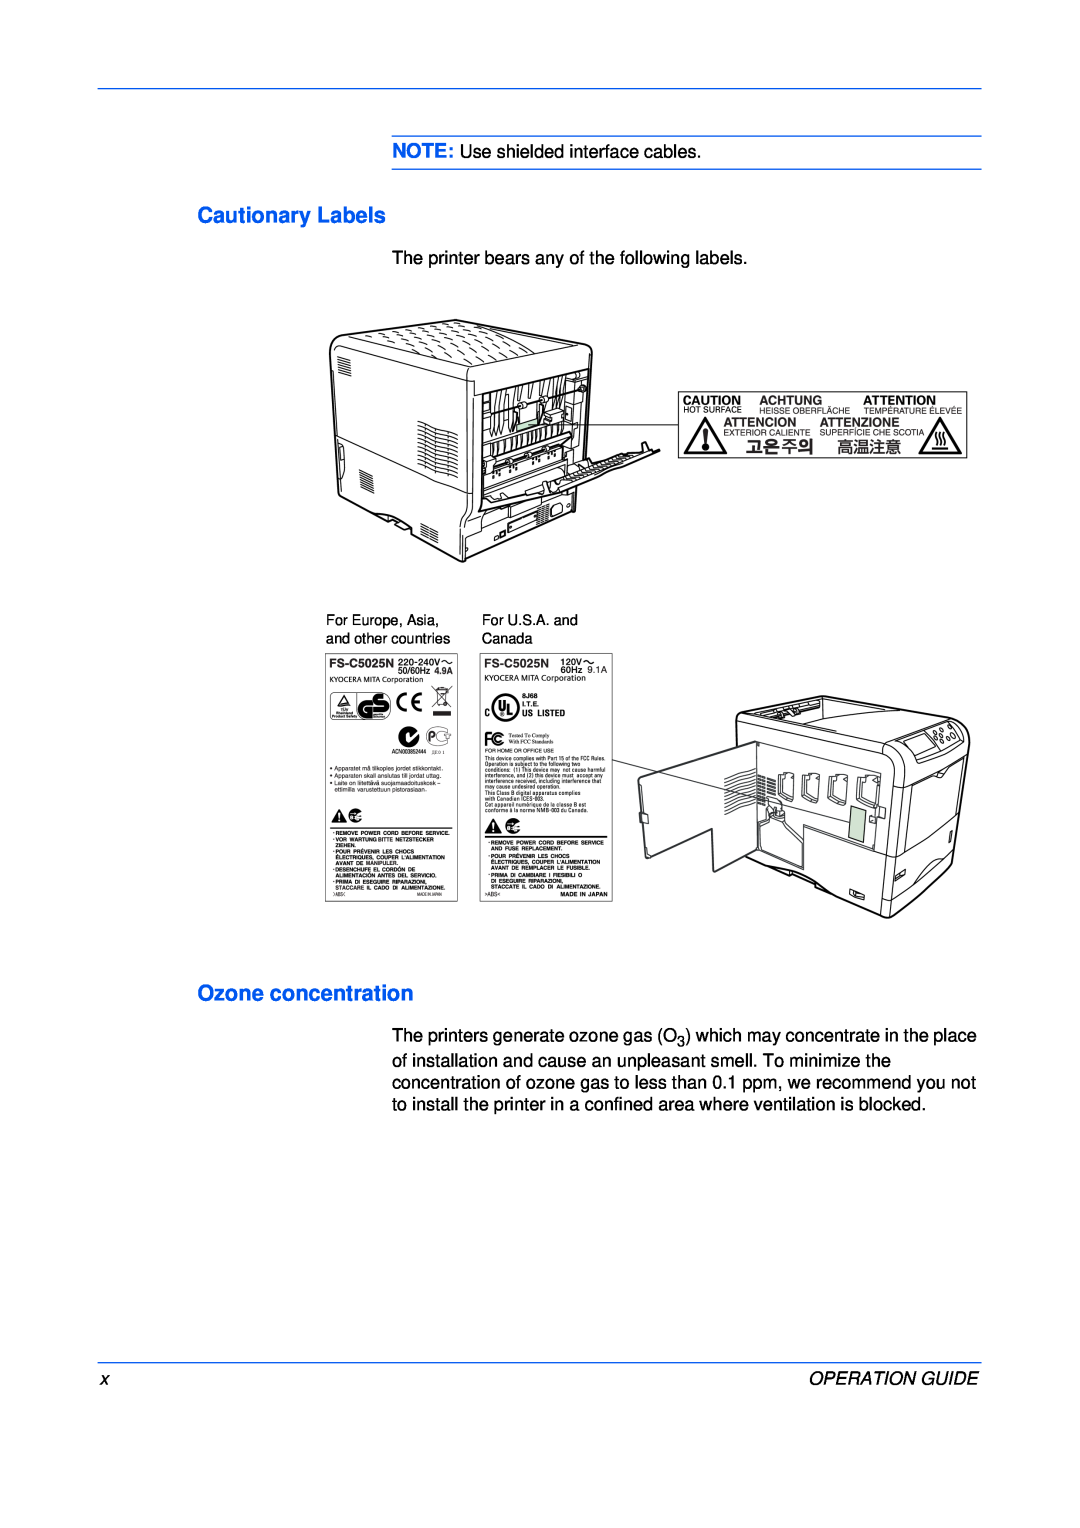 Kyocera FS-C5015N, FS-C5025N manual Cautionary Labels, Ozone concentration, Operation Guide 